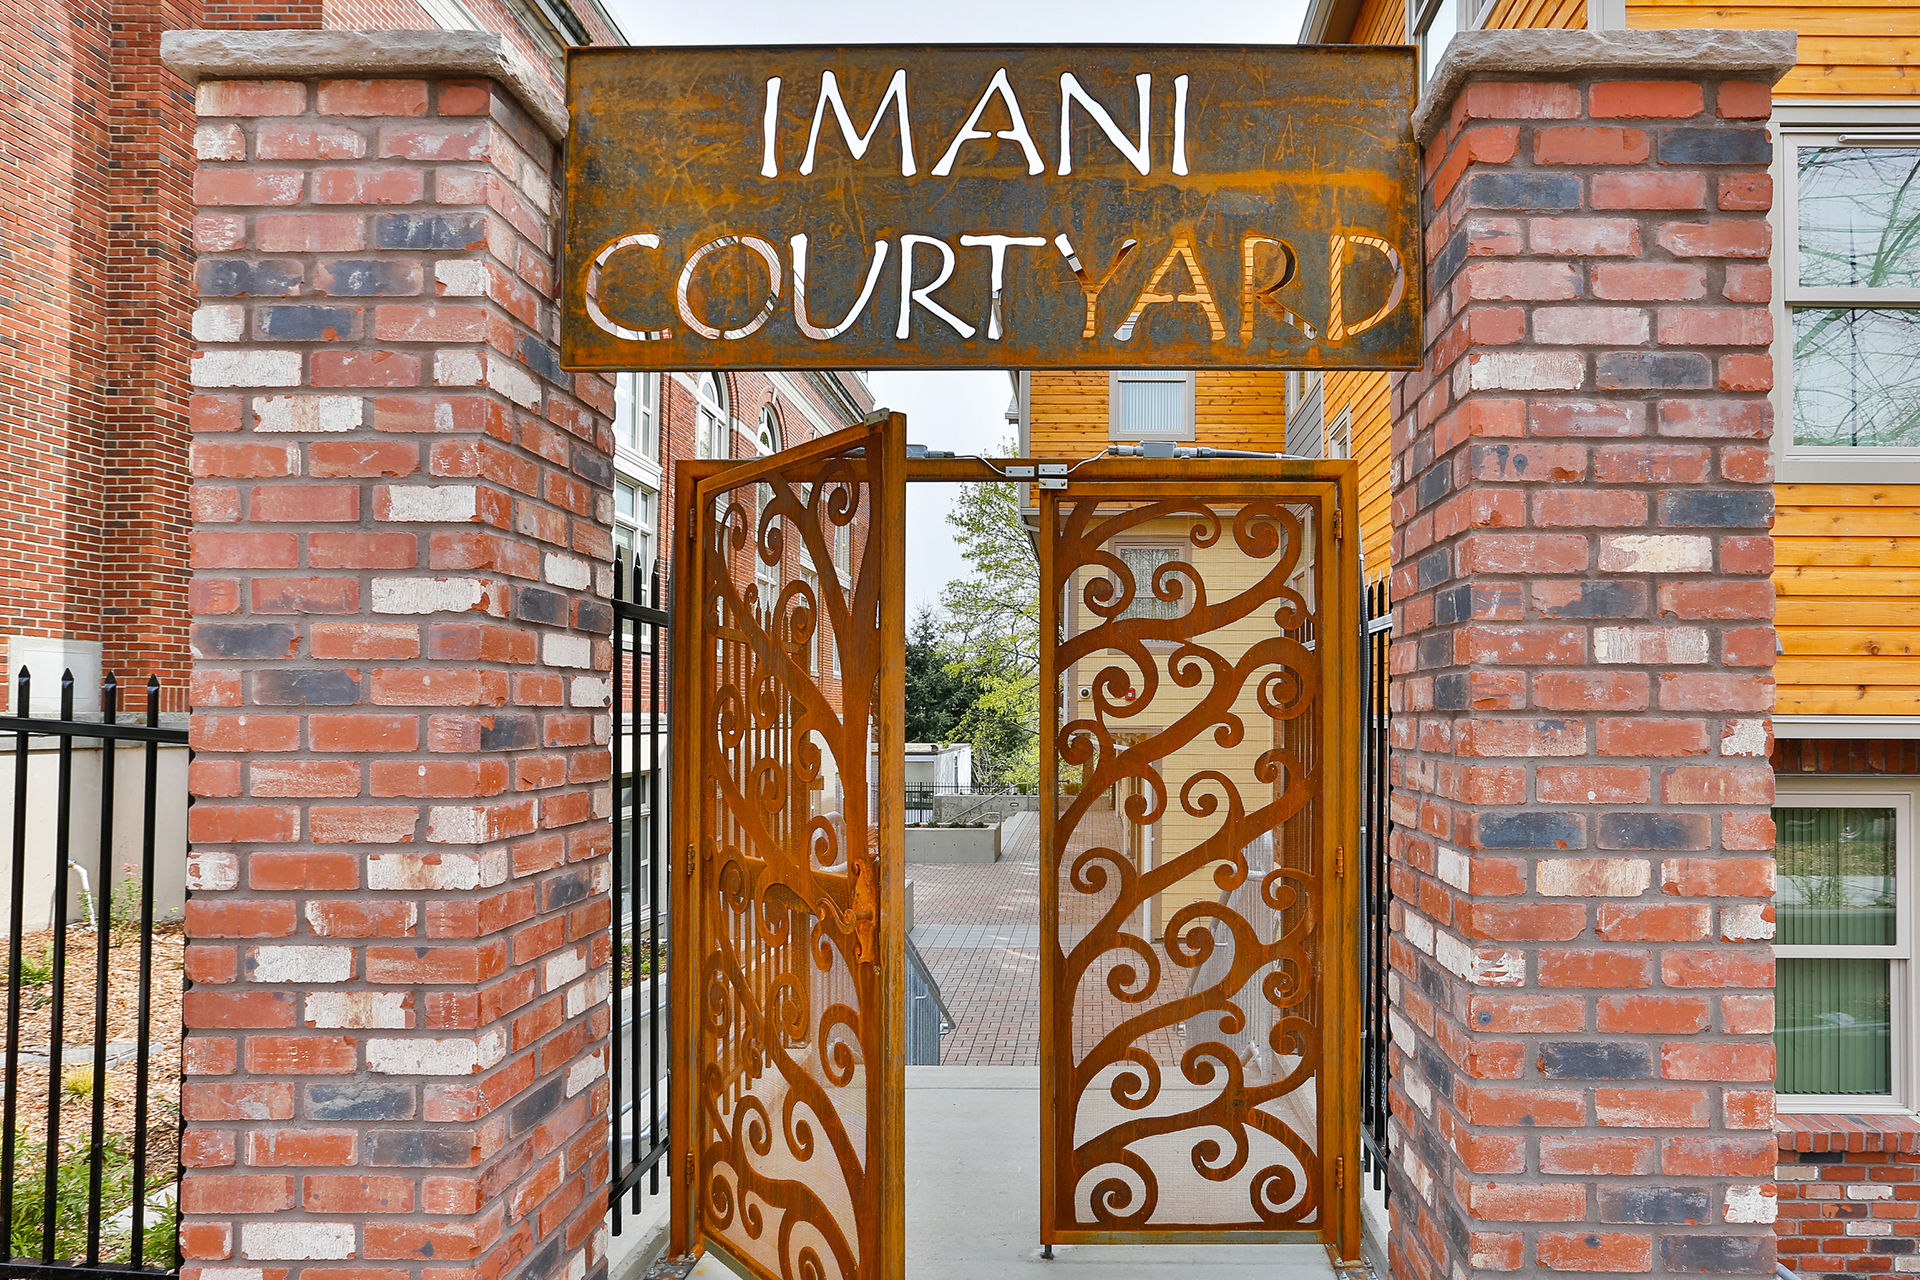 The entry to Imani Courtyard has an artistic copper gate nestled between two red brick pillars.